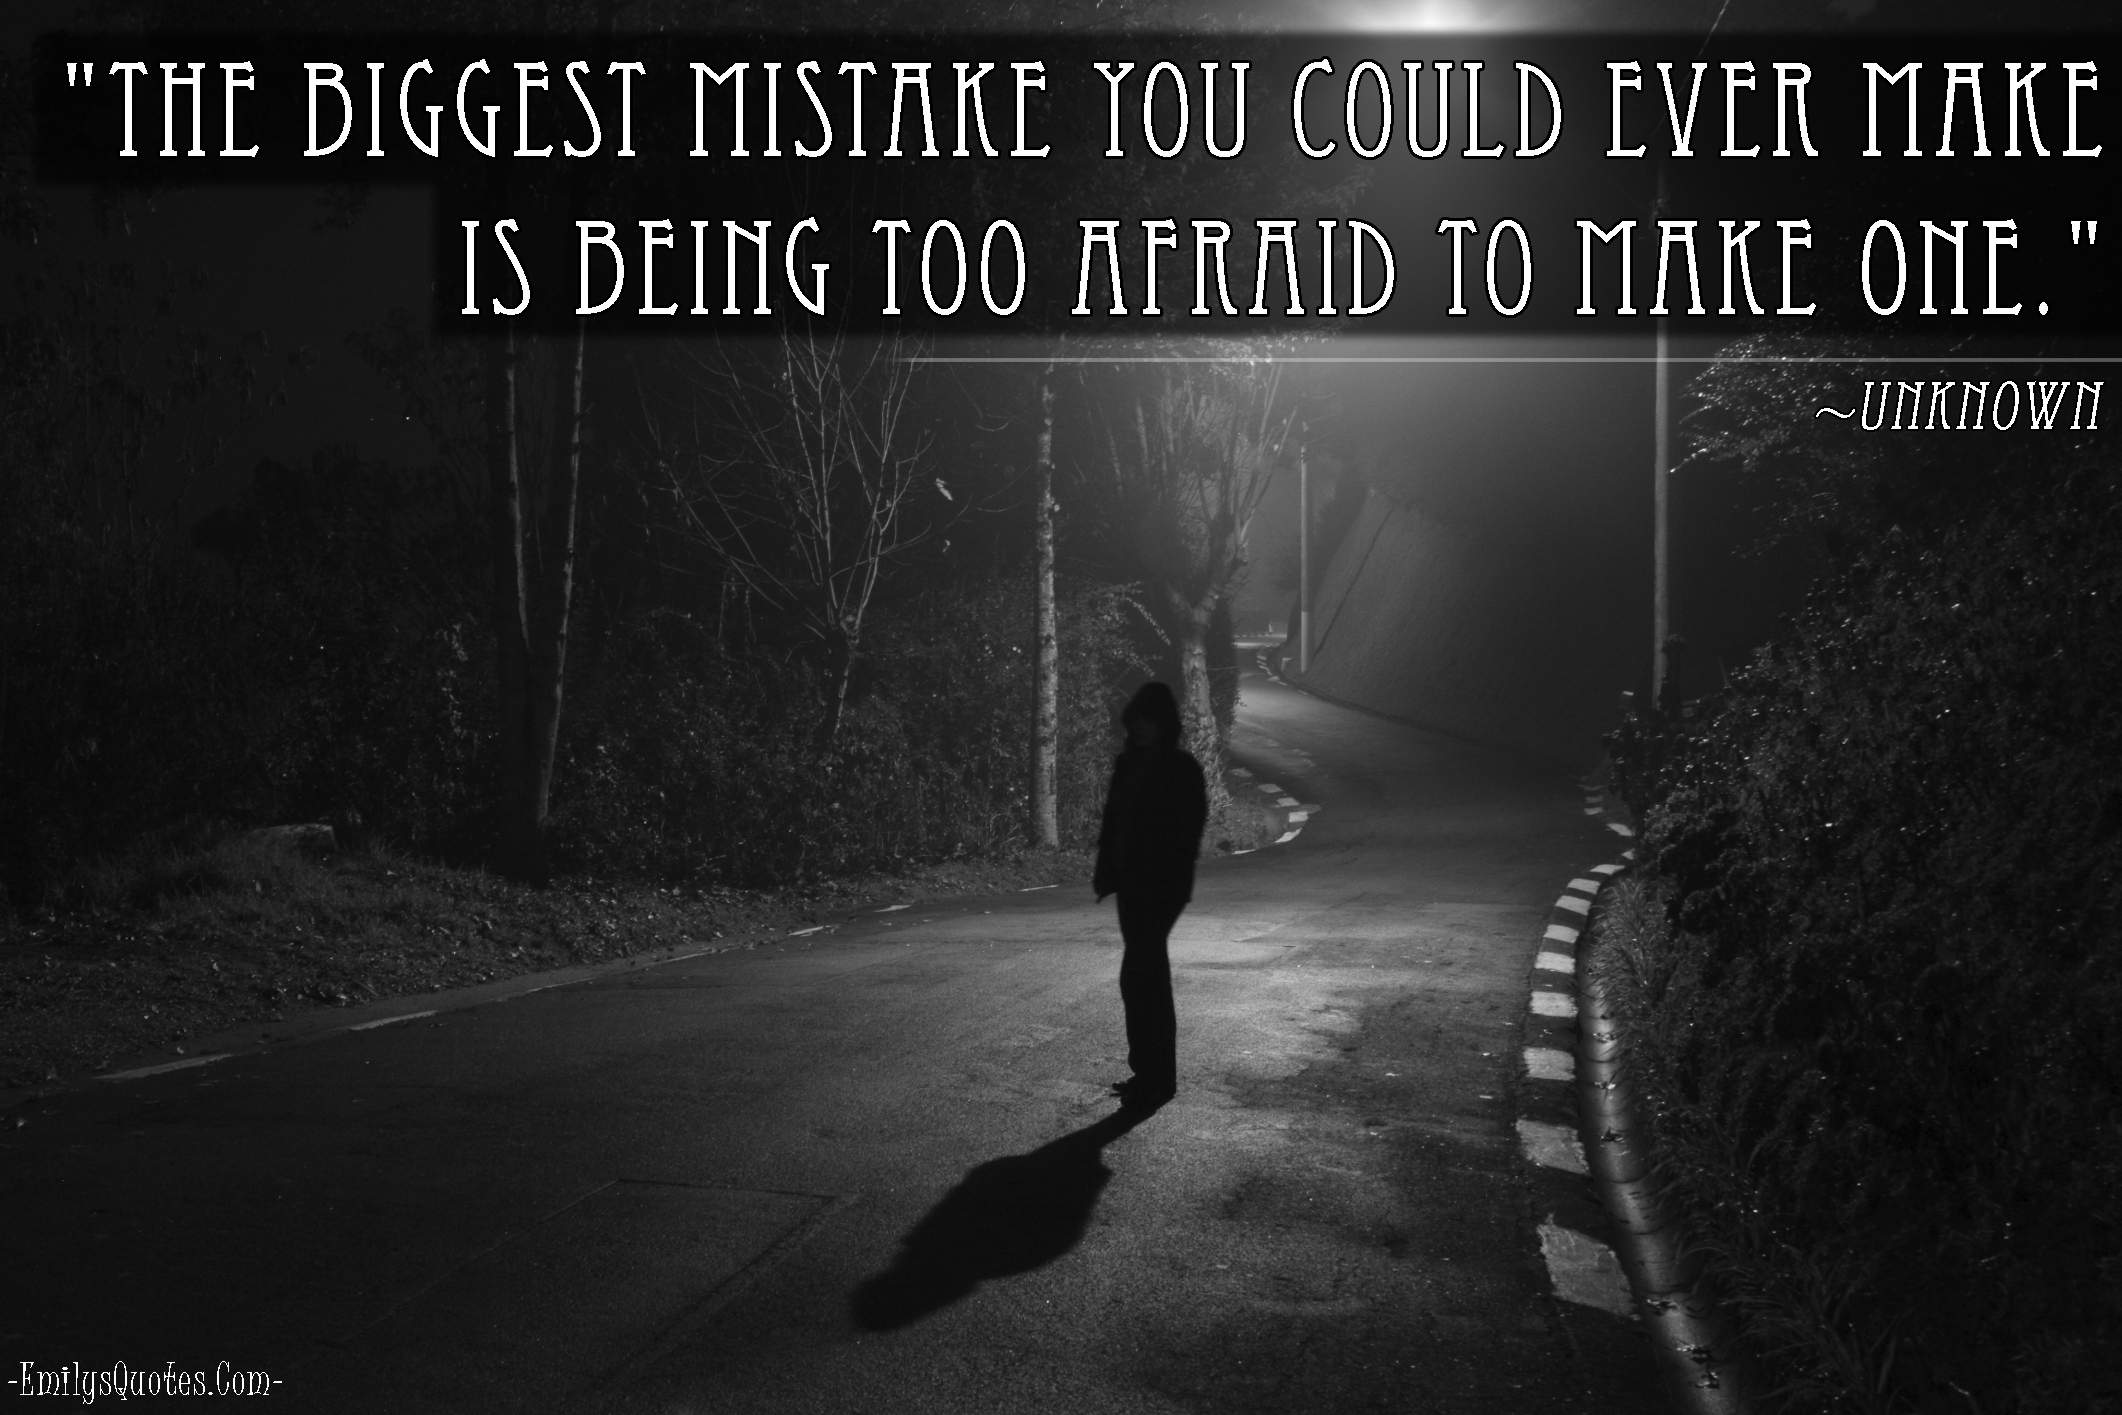 The biggest mistake you could ever make is being too afraid to make one